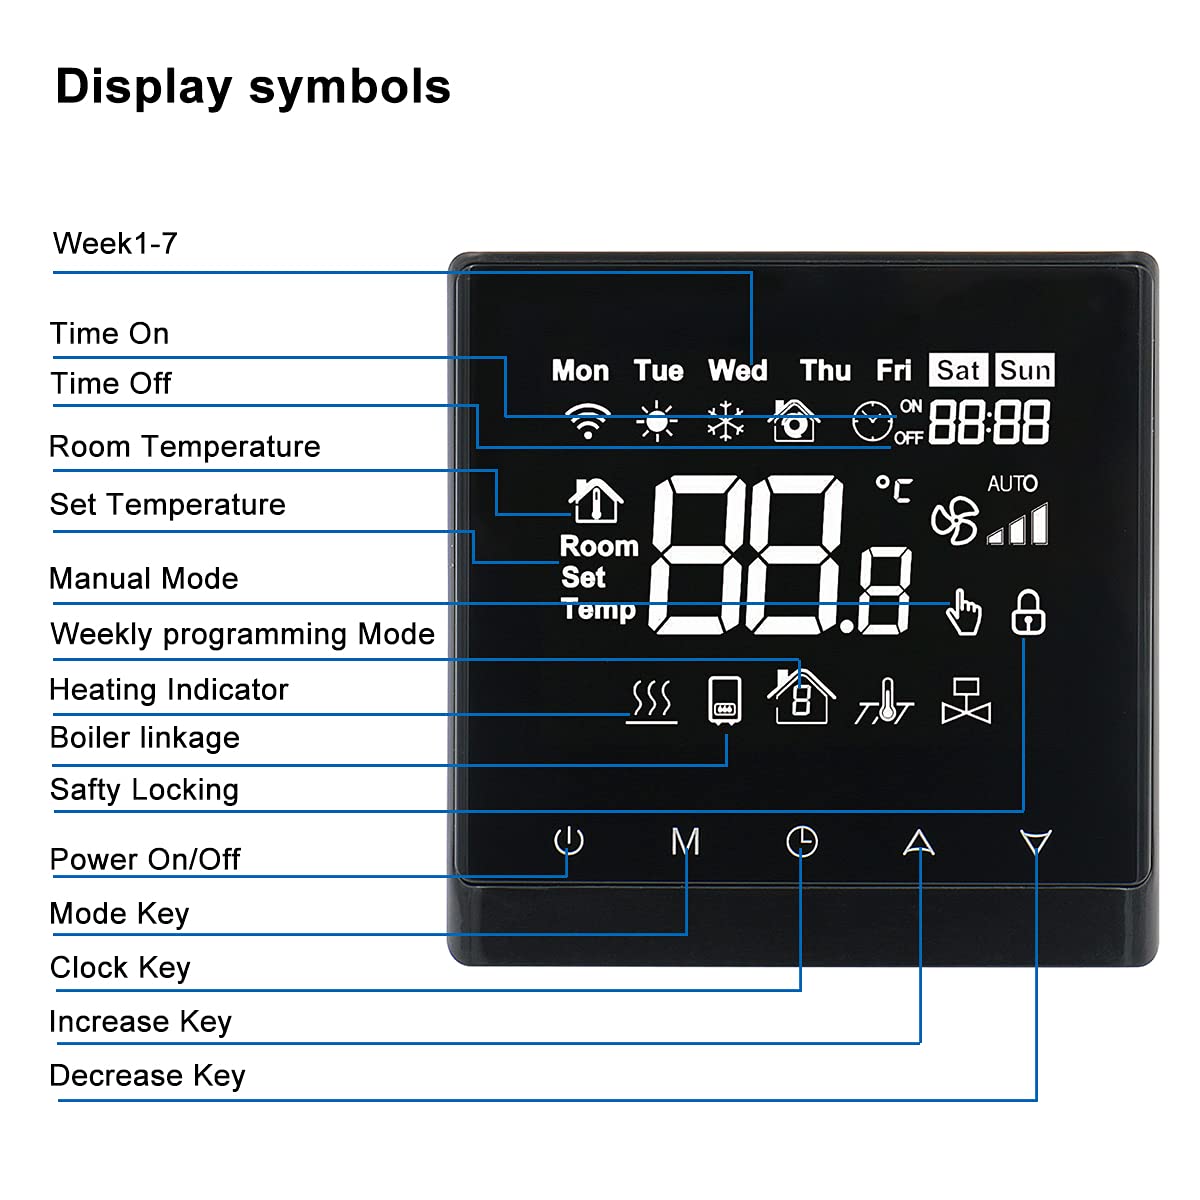 Room Thermostat Digital Room Temperature Controller-LCD Room Heating Set New